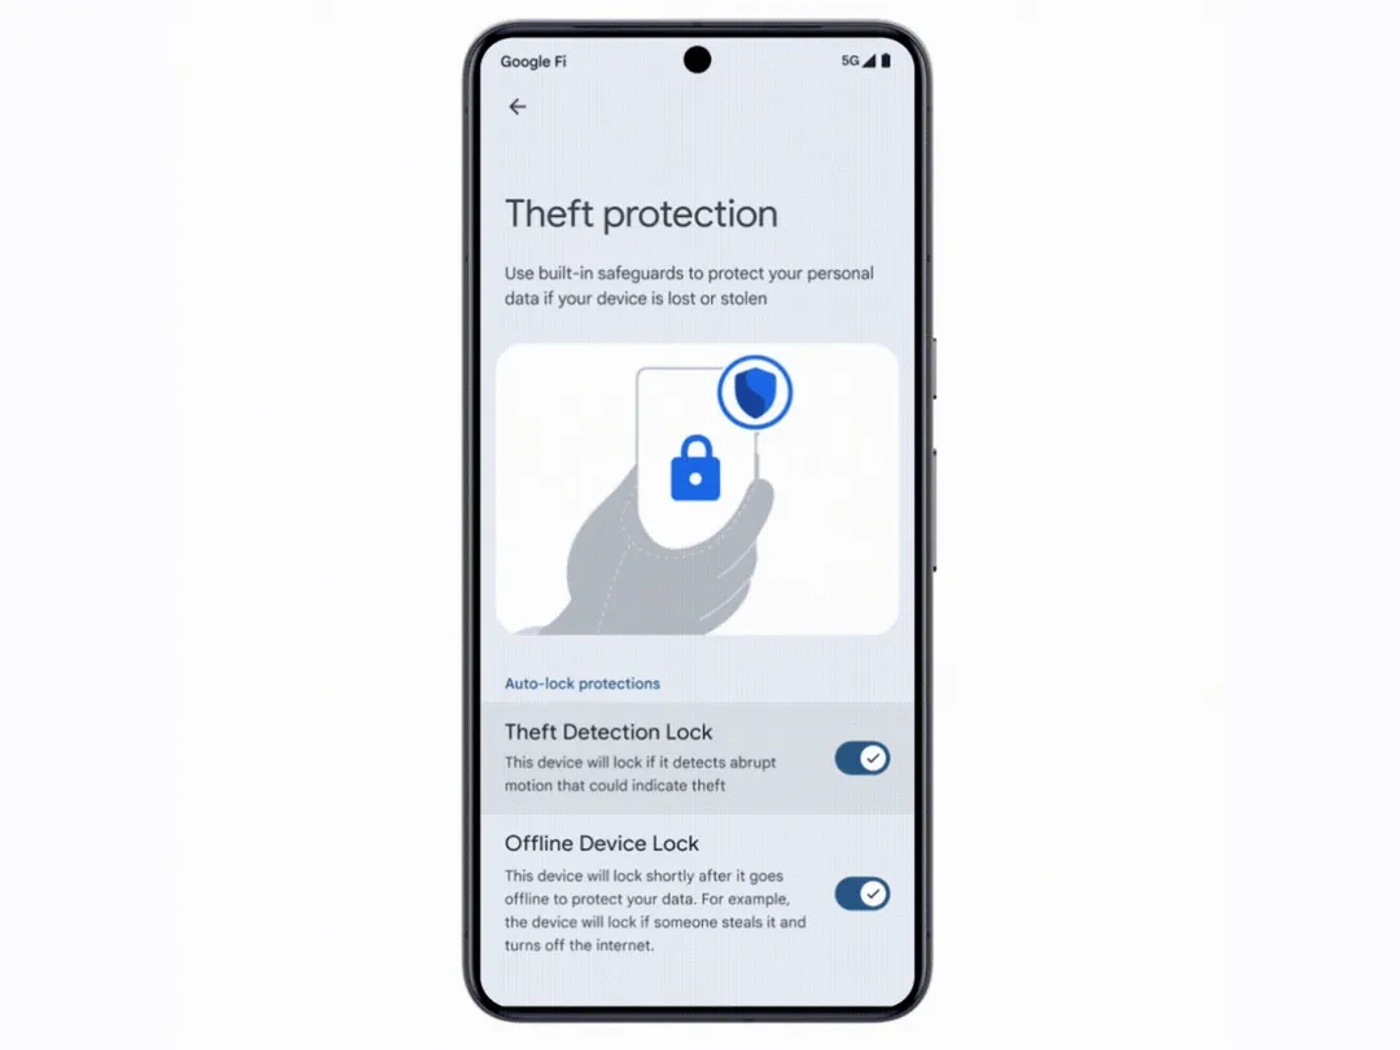 New Feature from Google: Theft Detection Lock